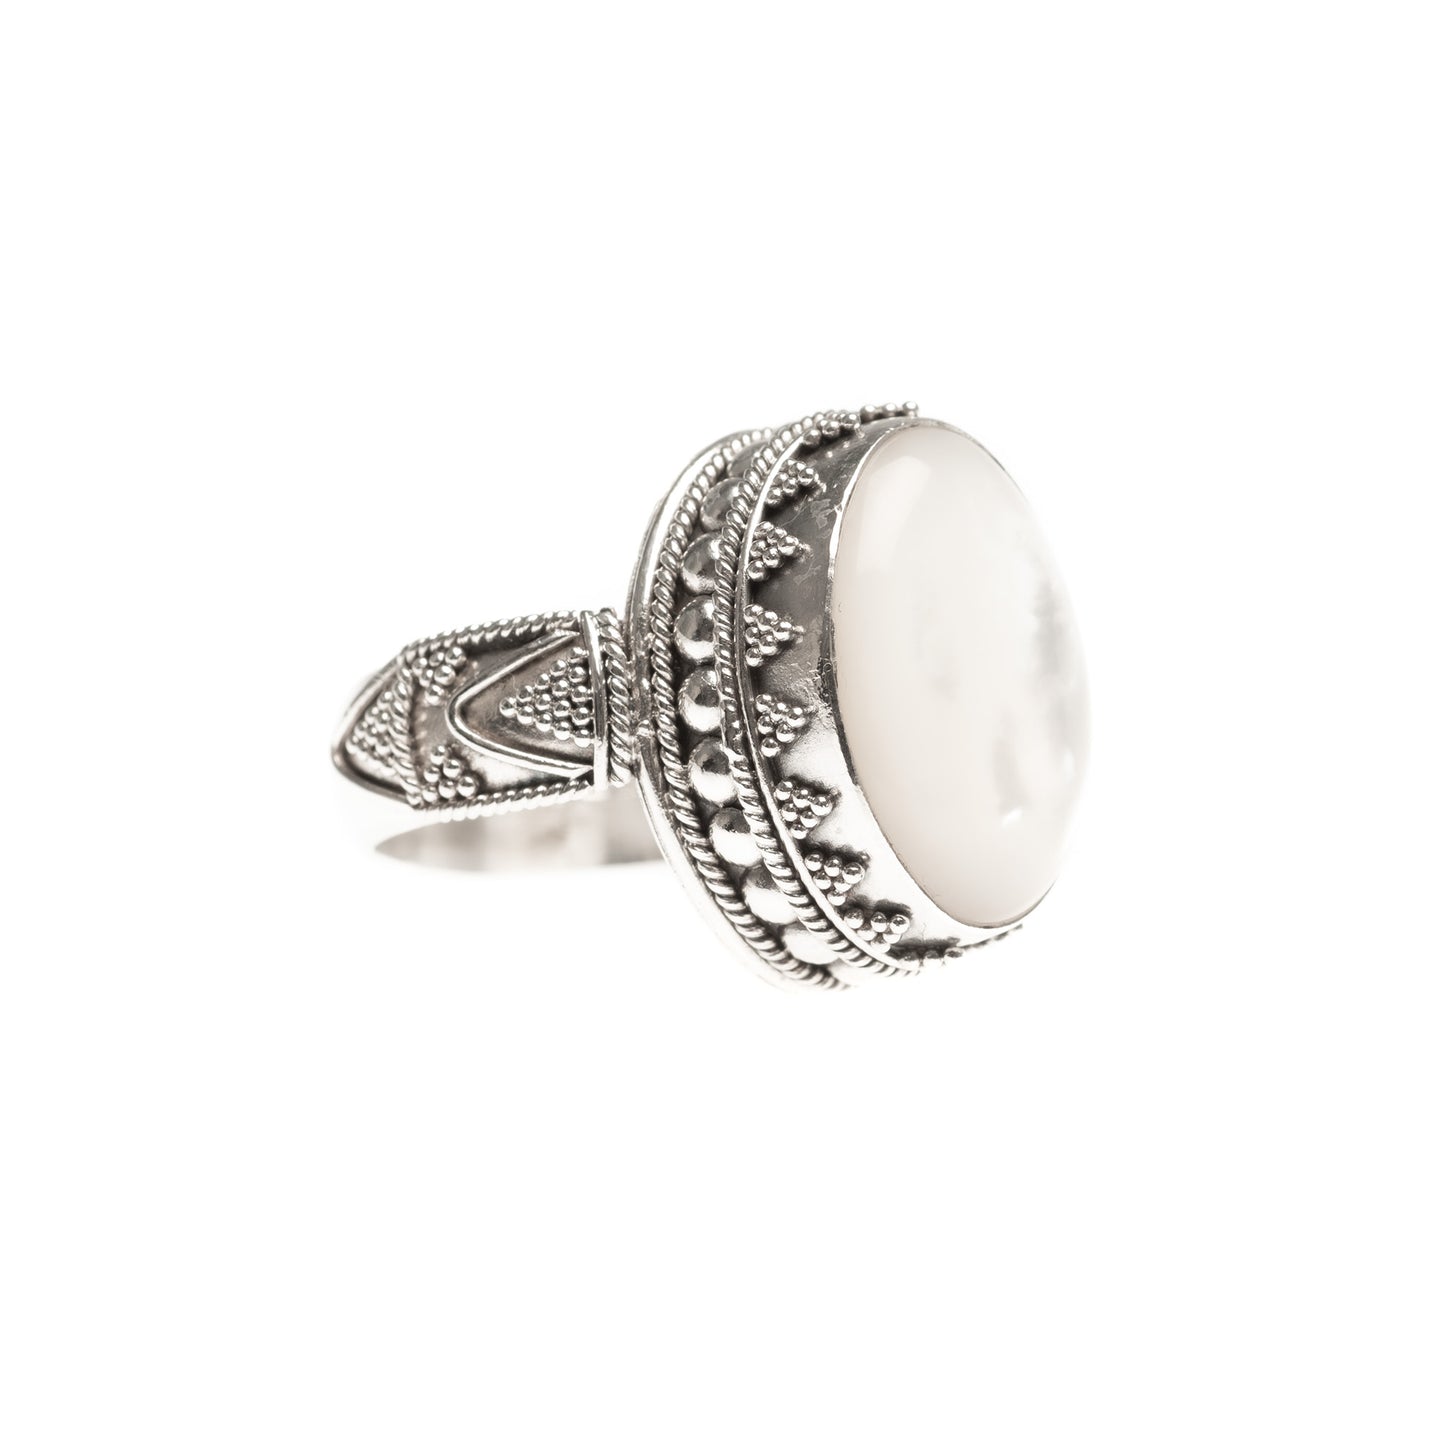 Vintage BA Suarti Silver Statement Ring With Mother Of Pearl Cabochon Size N (Code A414)